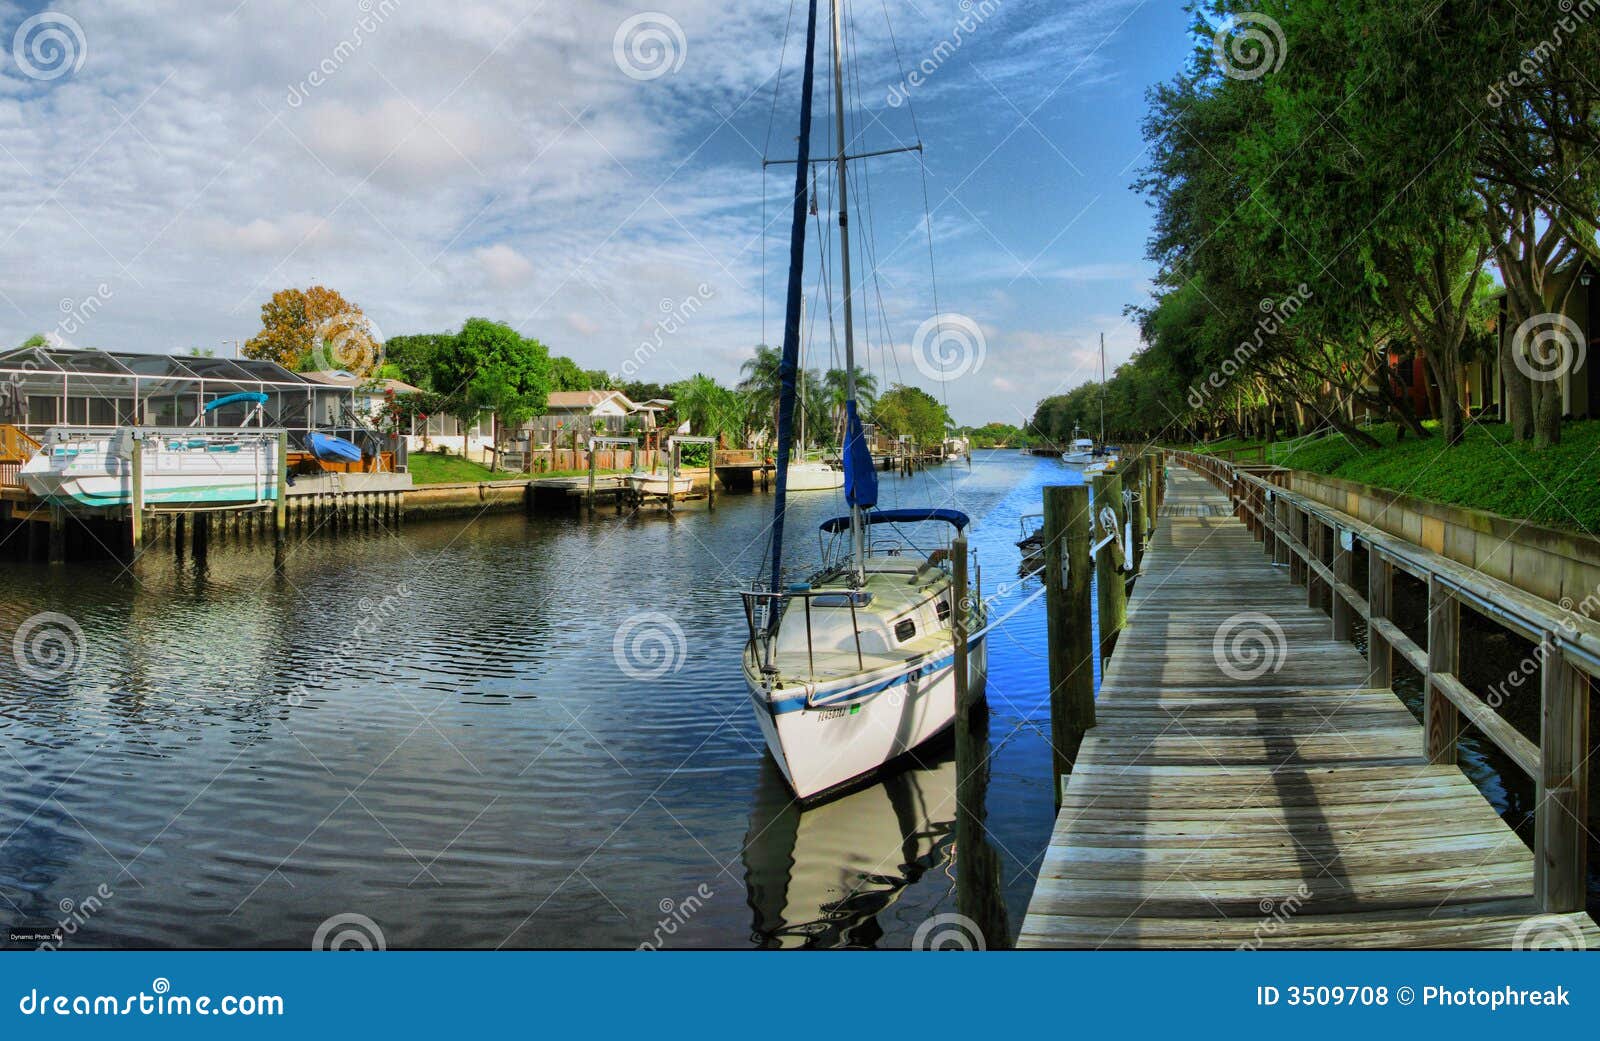 small boat docked in the waterway.